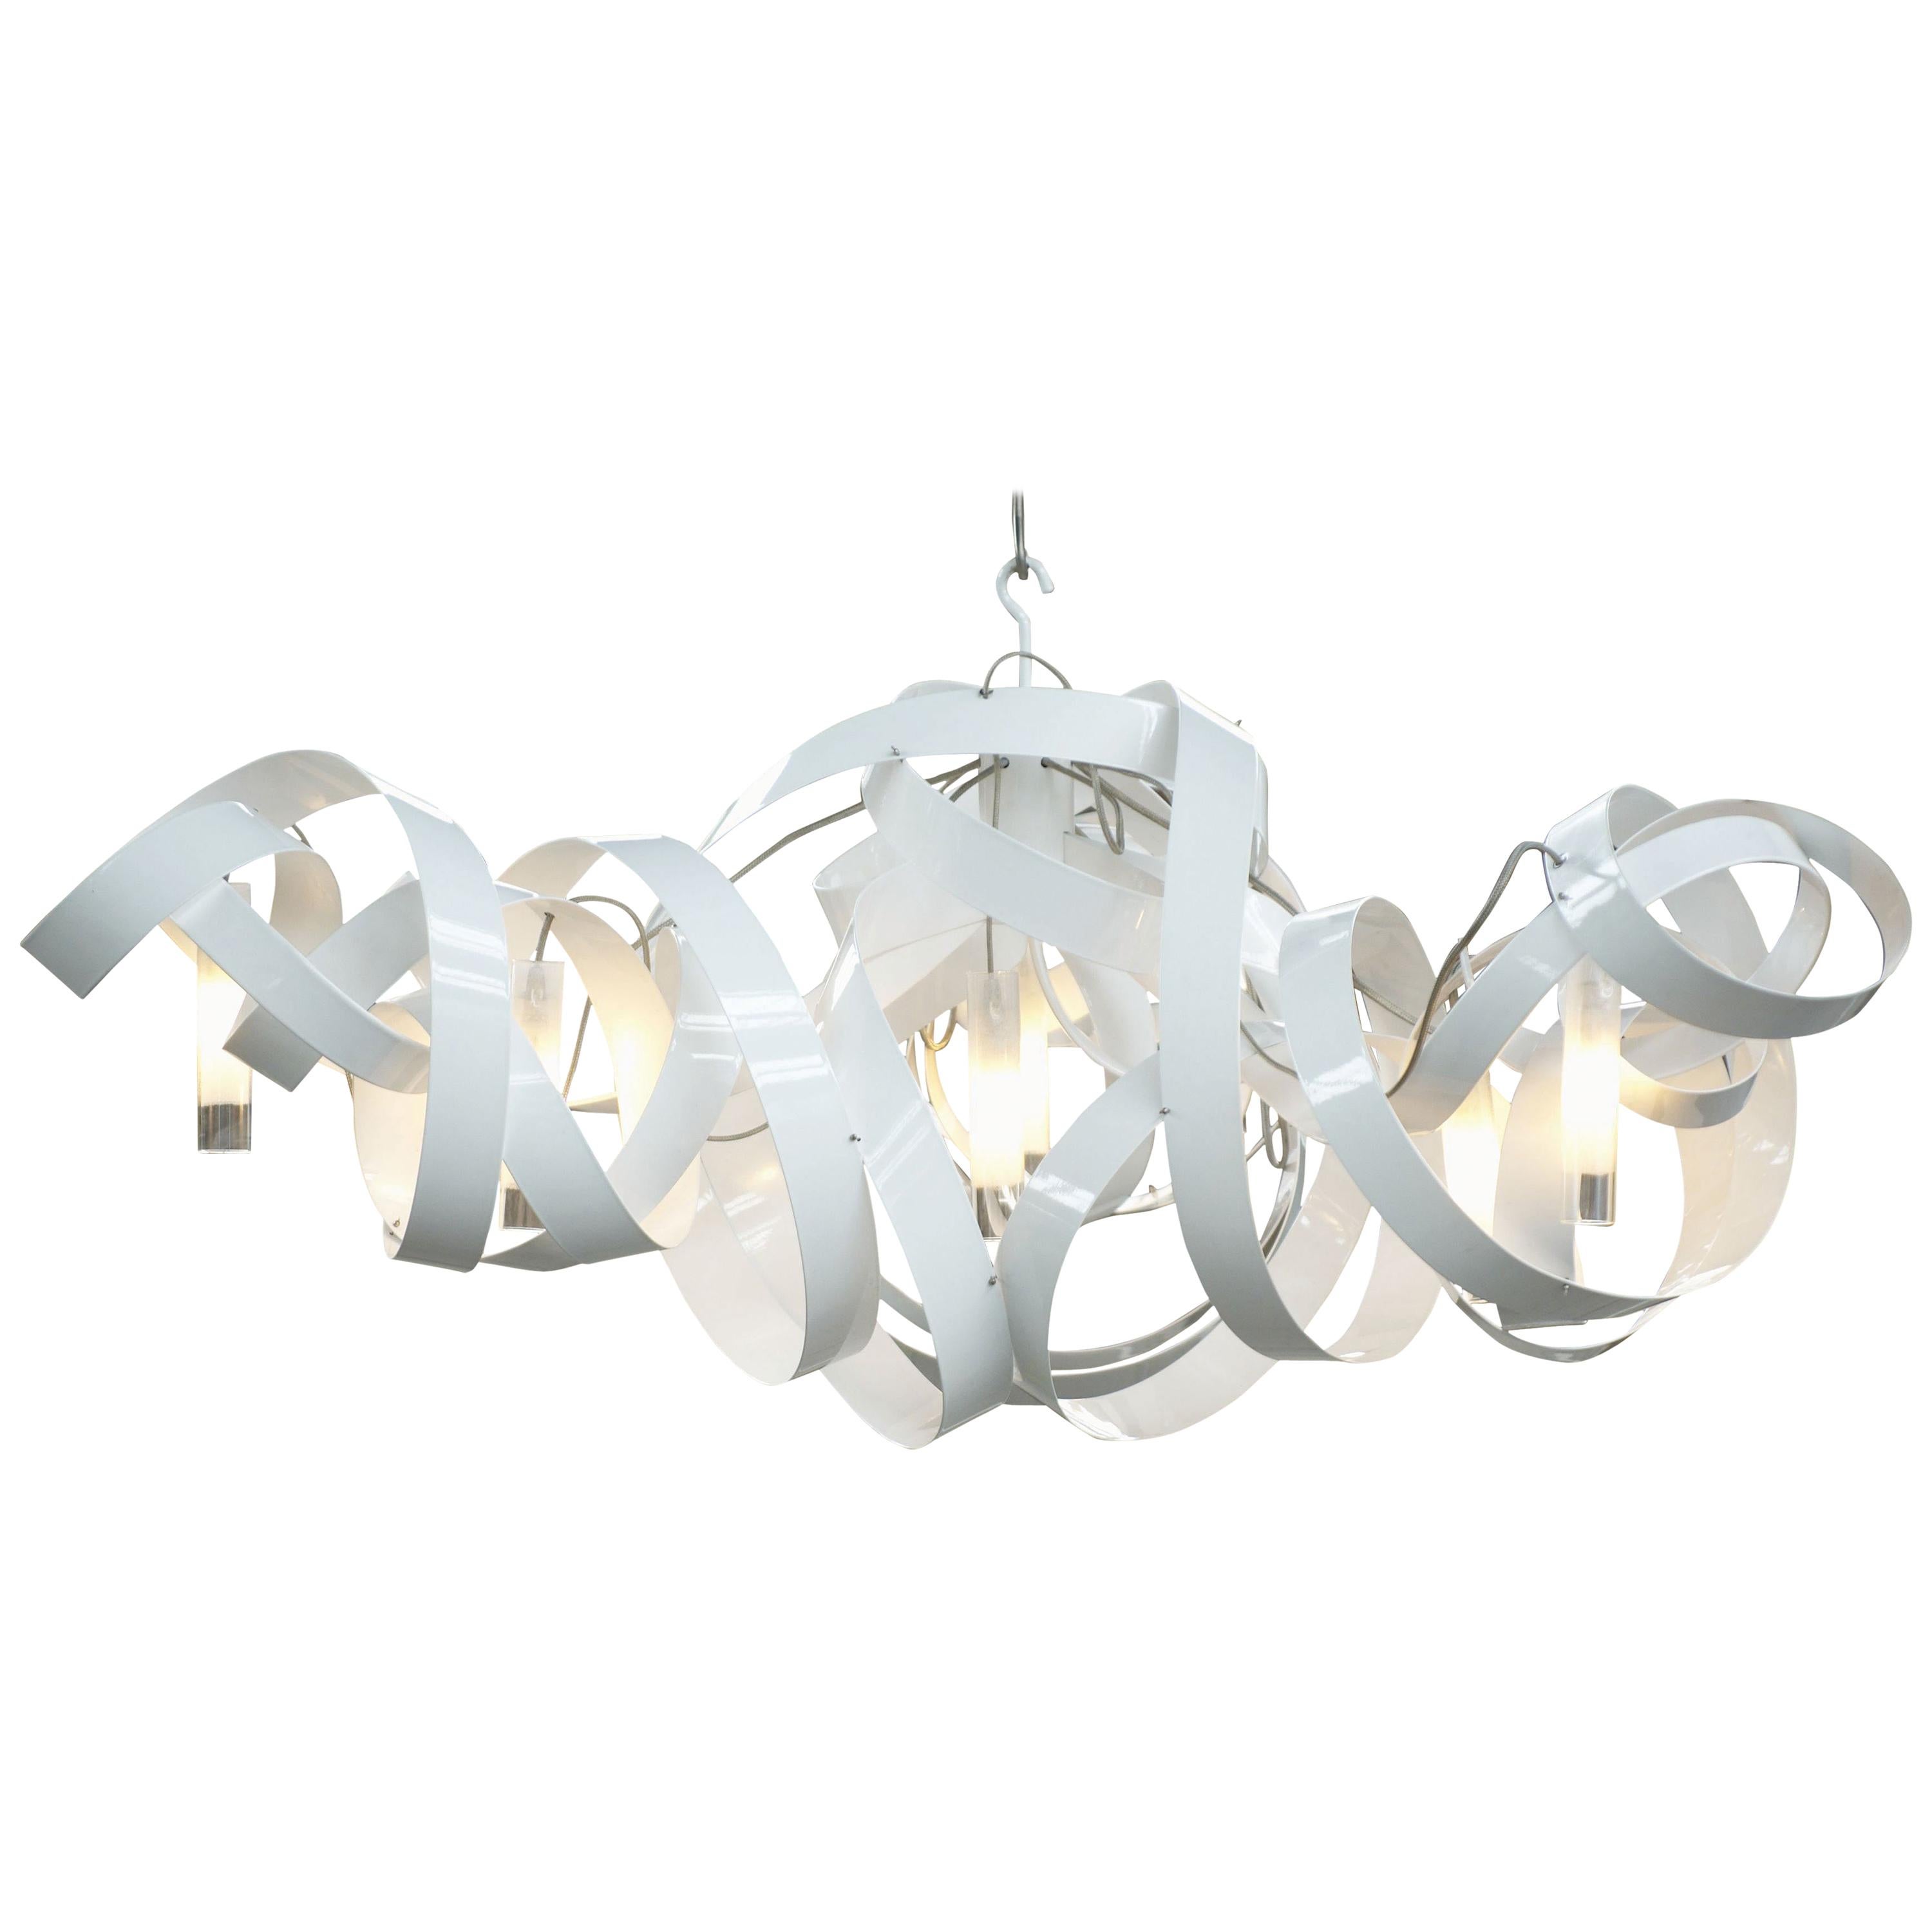 Jacco Maris Montone Oval Six Lights Chandelier in White Finish For Sale